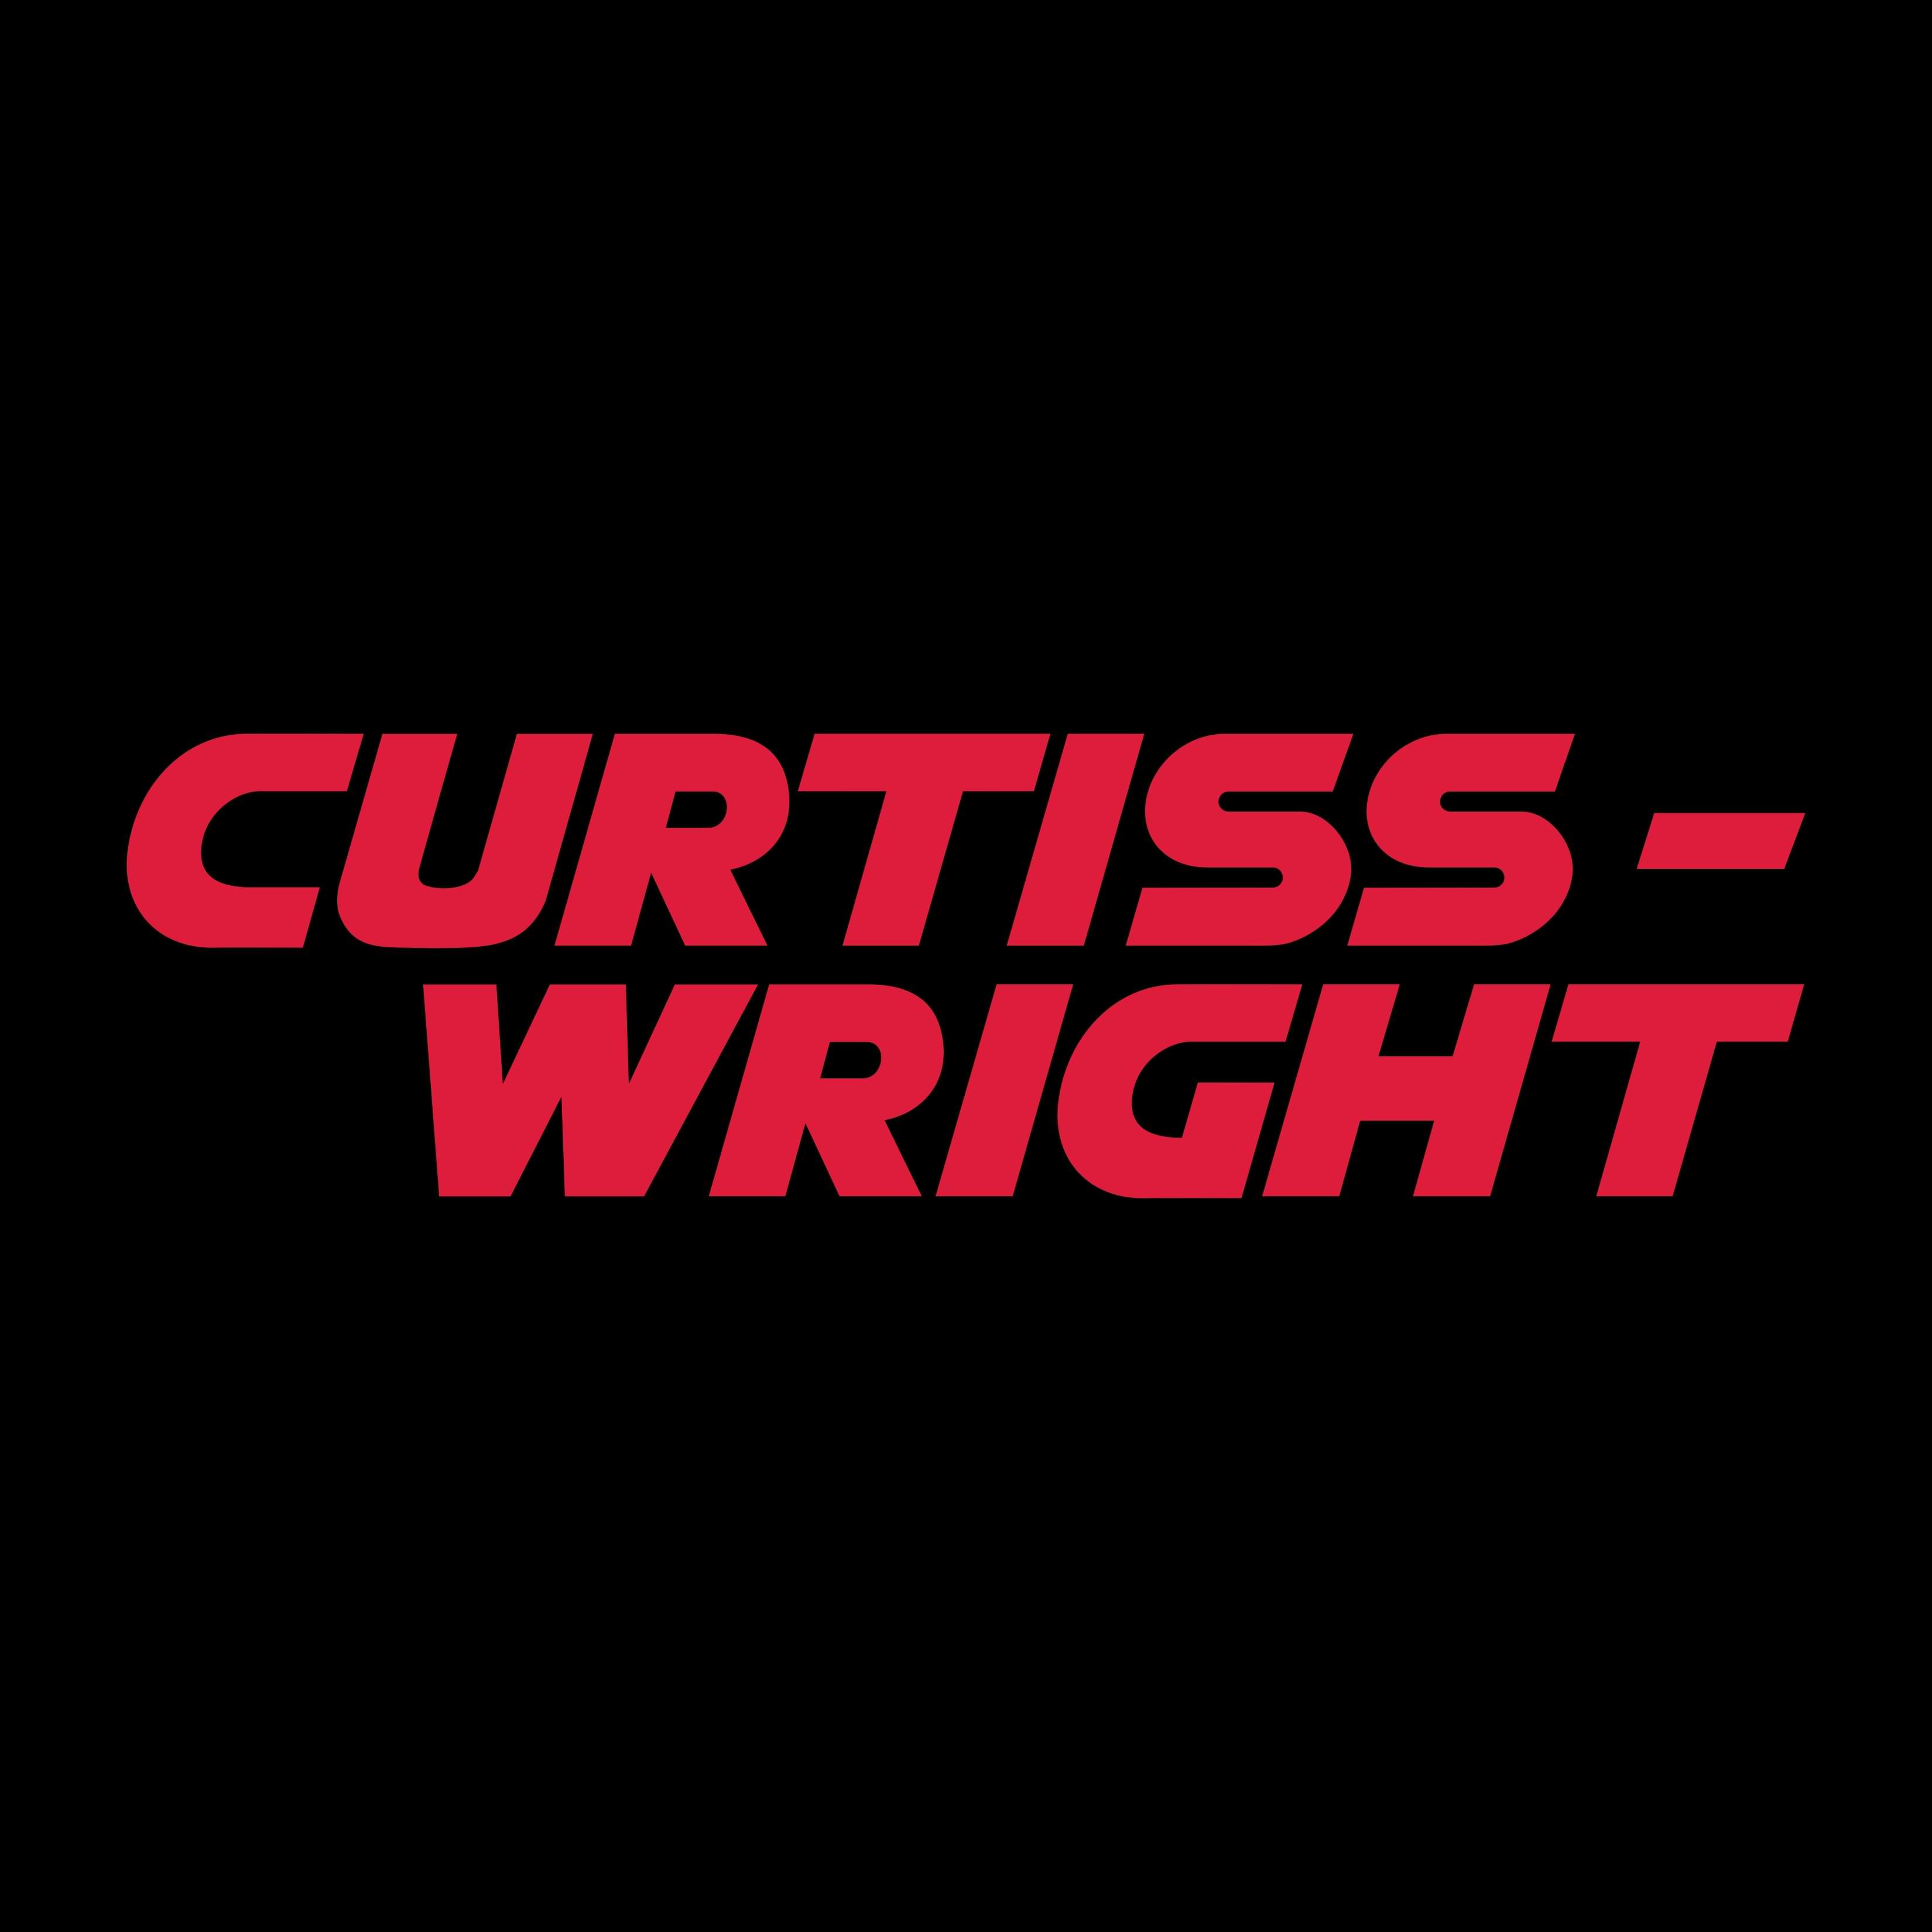 Curtiss-wright